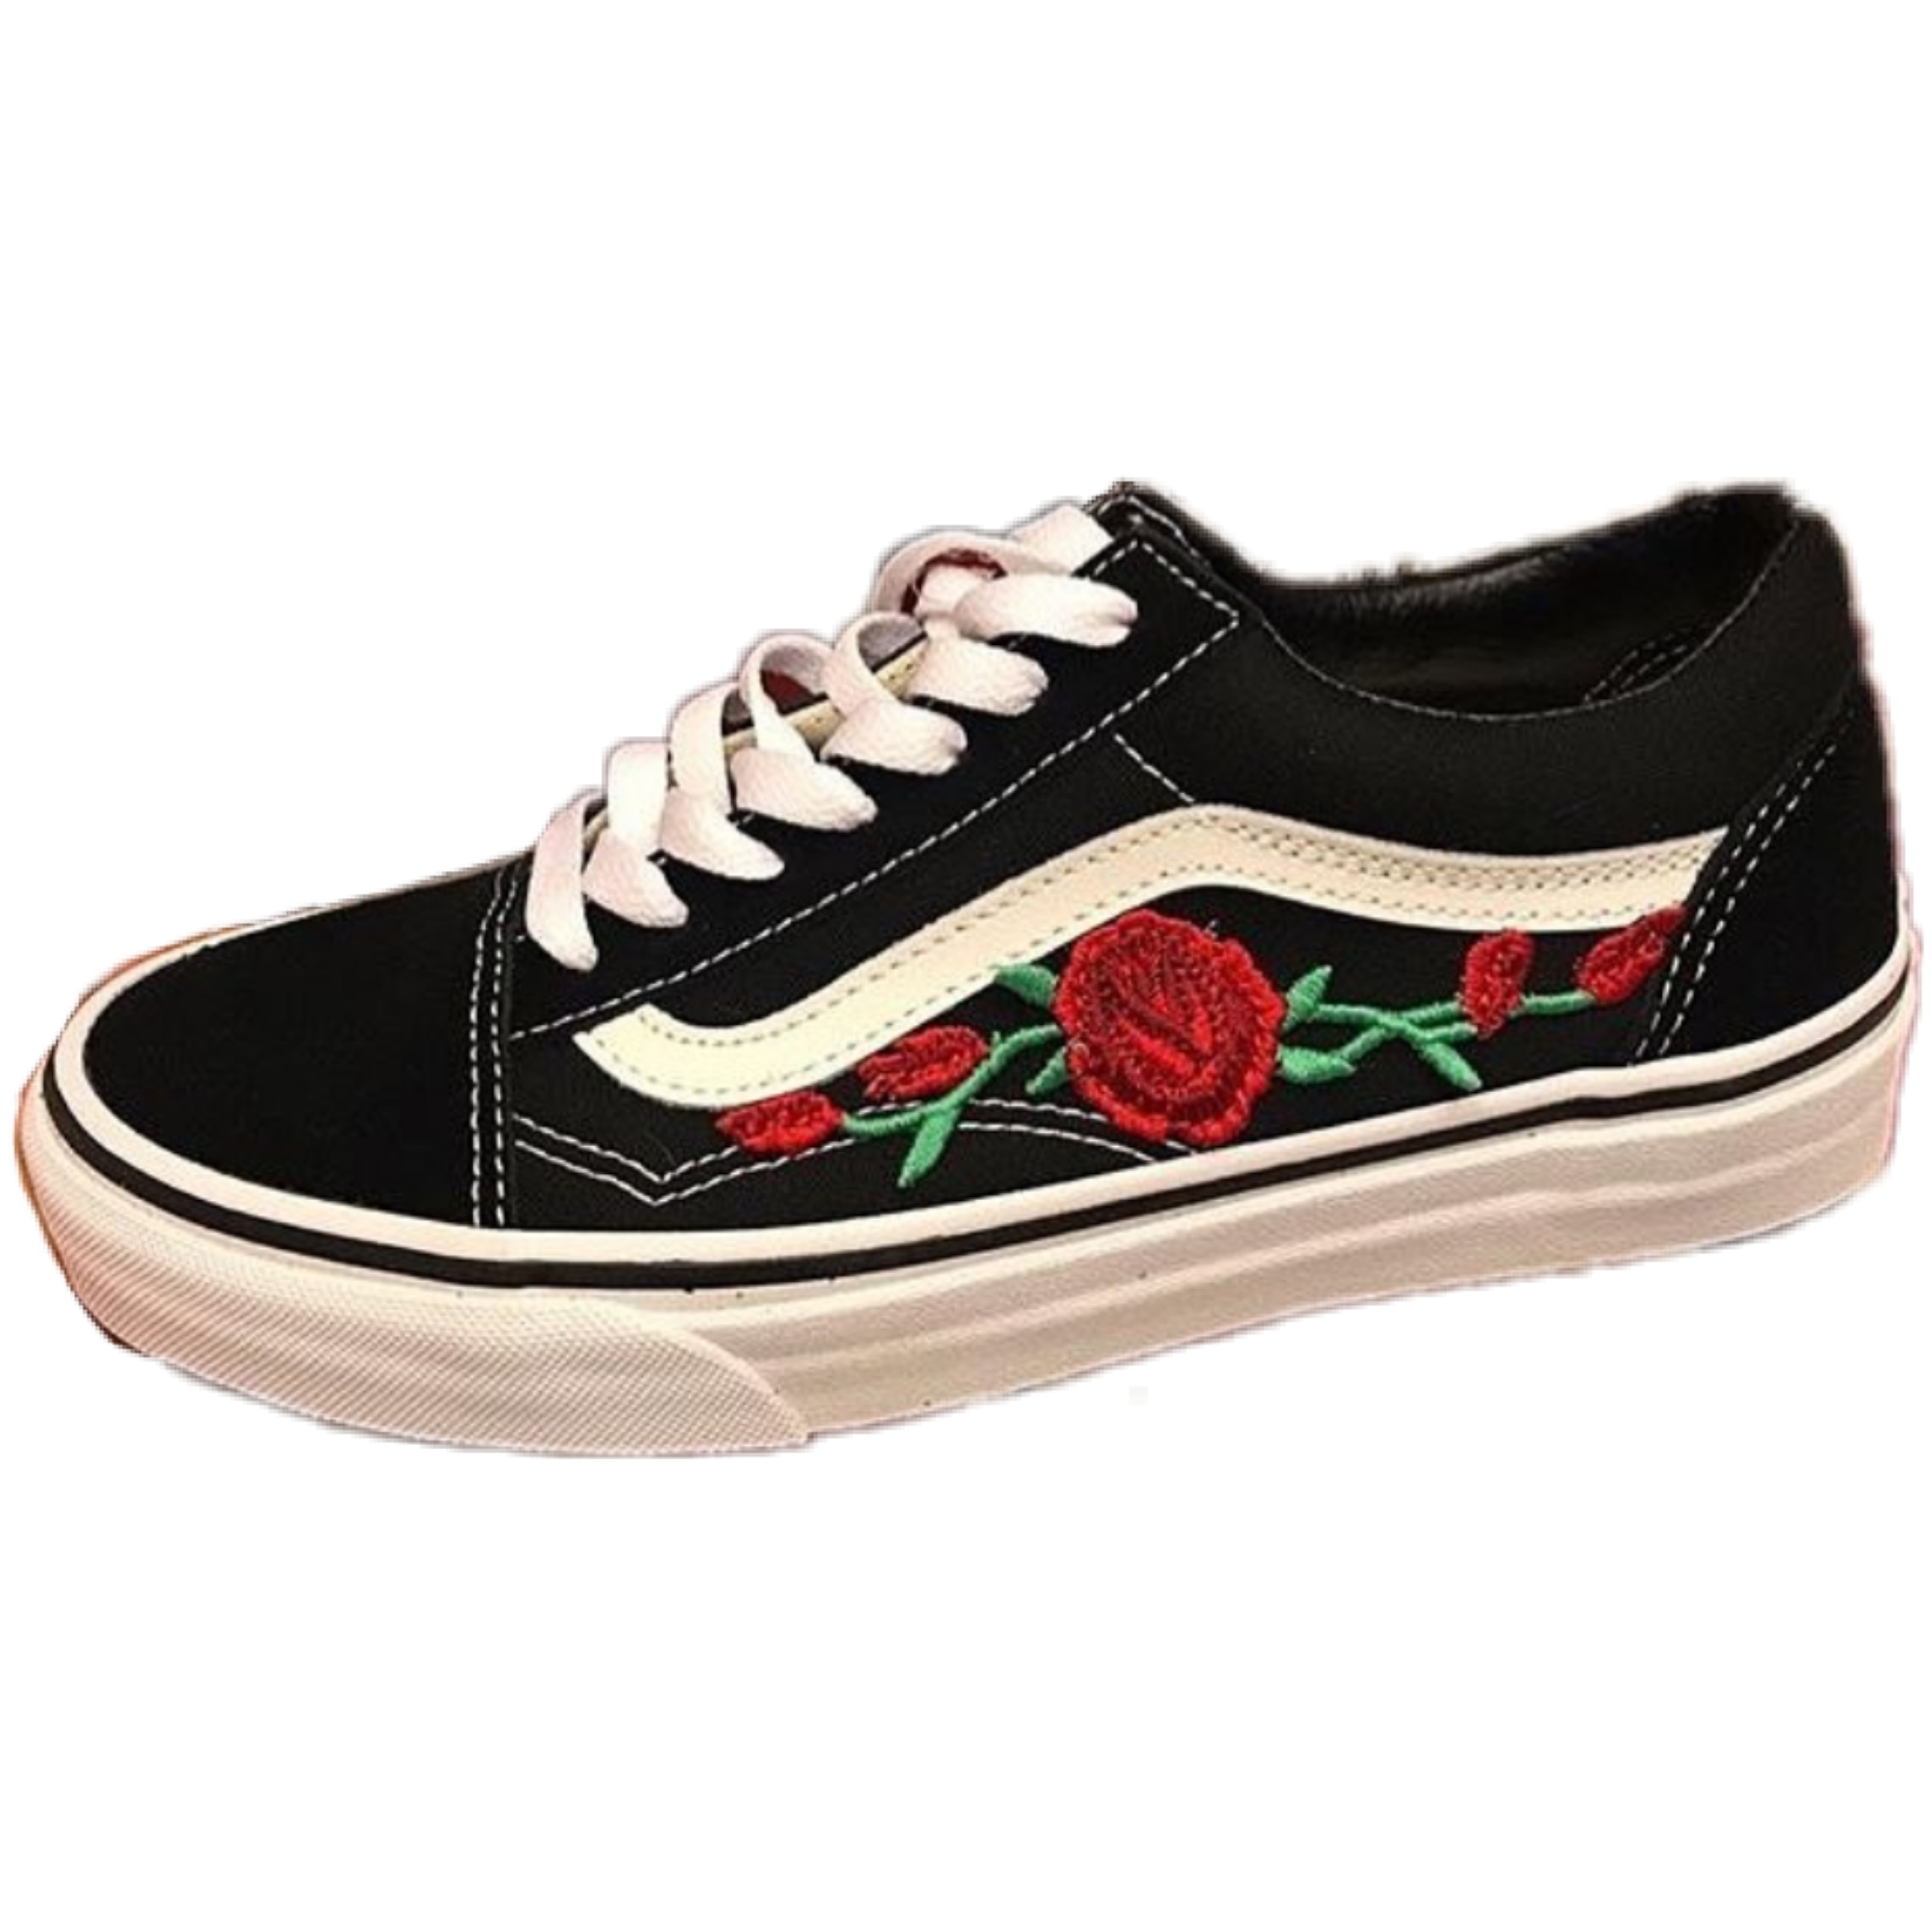 shoes aesthetic vans roses - Sticker by Linda Elza